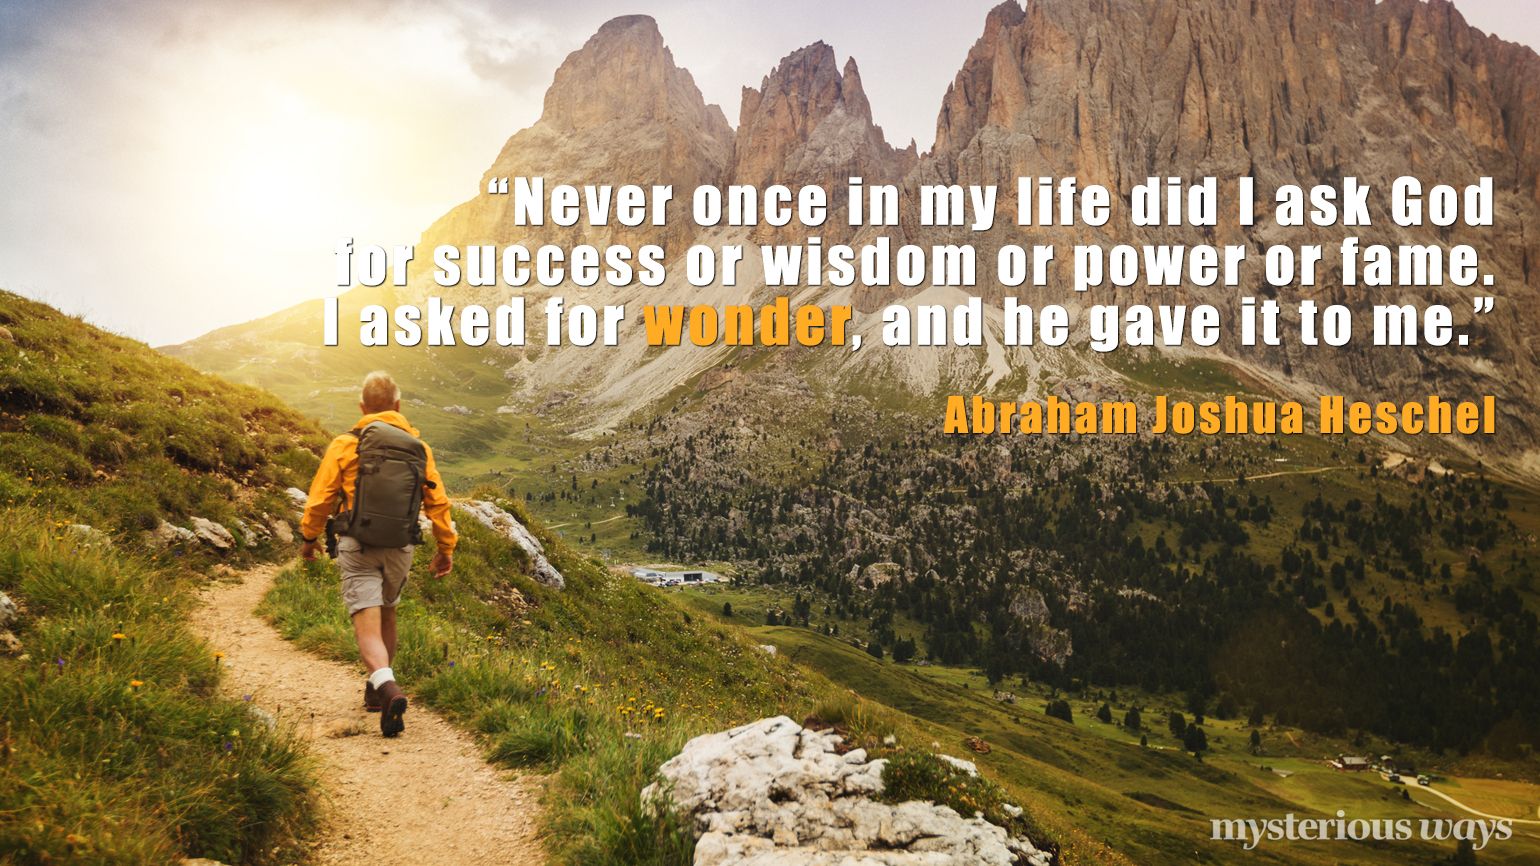 “Never once in my life did I ask God for success or wisdom or power or fame. I asked for wonder, and he gave it to me.”